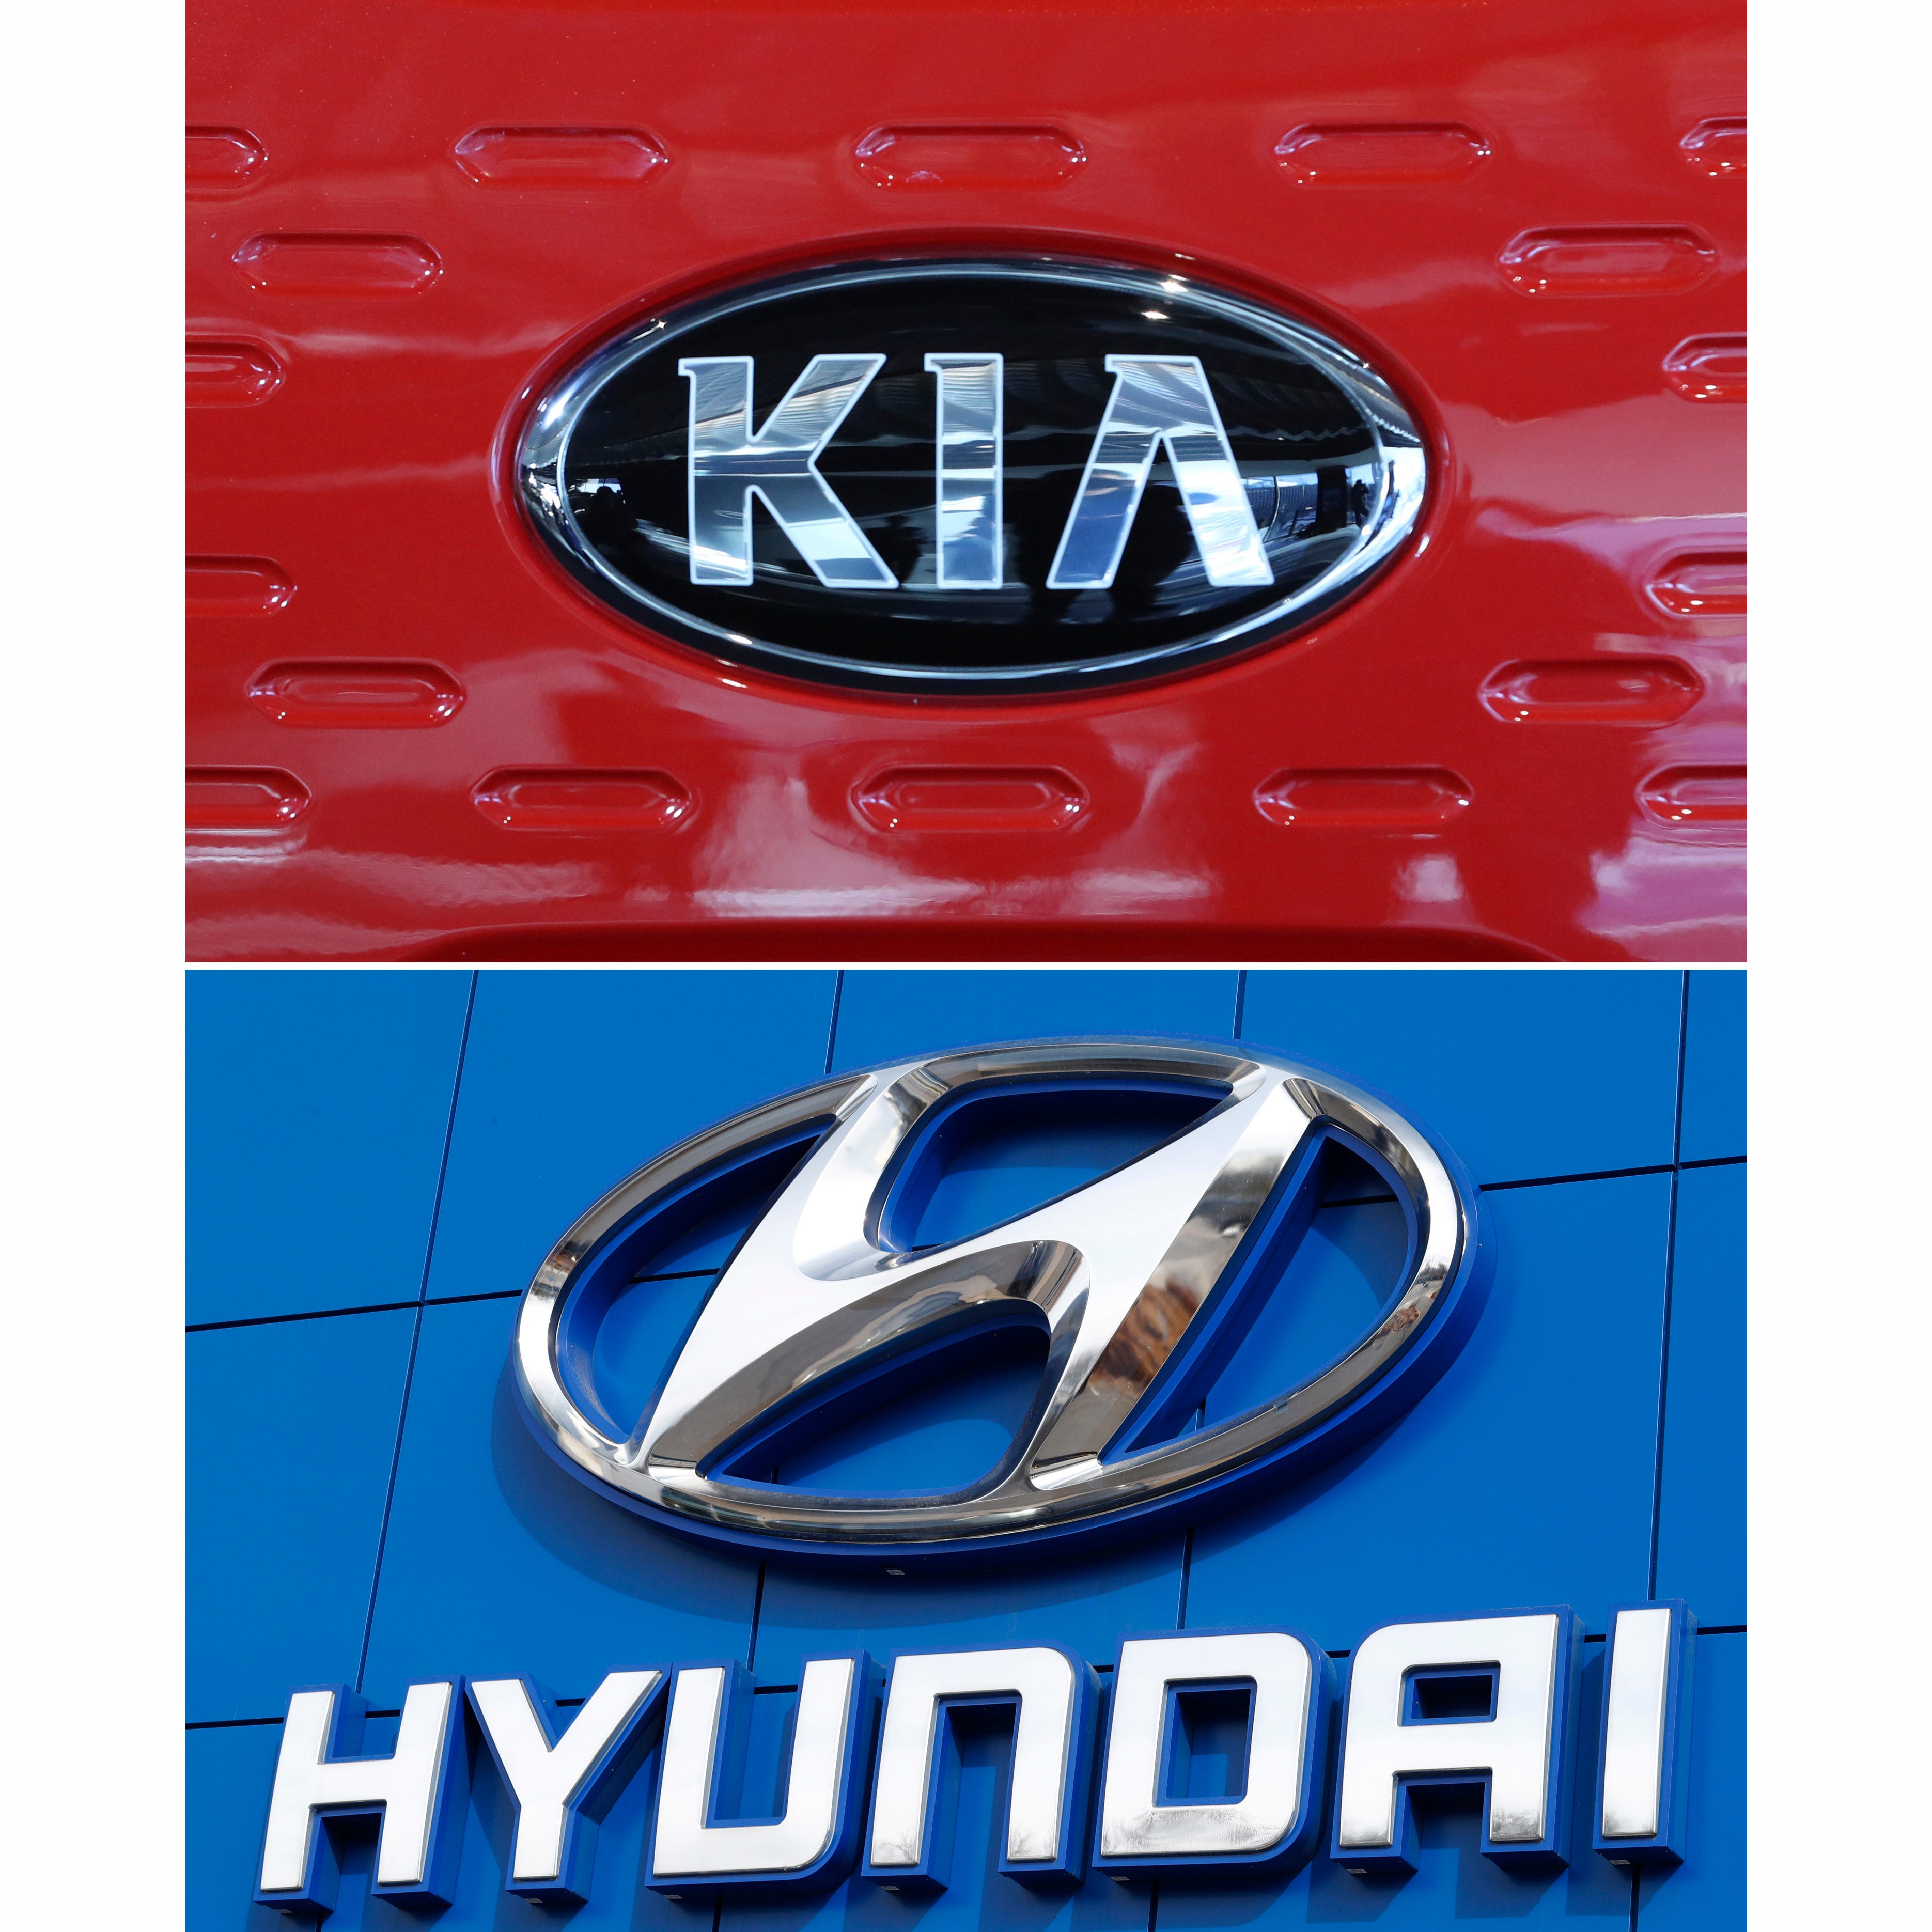 This combination of file photos shows the logo of Kia Motors Dec. 13, 2017, in Seoul, South Korea, top, and Hyundai logo April 15, 2018, in the south Denver suburb of Littleton, Colo., bottom. Hyundai and Kia are telling the owners of nearly 485,000 vehicles in the U.S., Tuesday, Feb. 8, 2022, to park them outdoors because they can catch fire. (AP Photo, File)